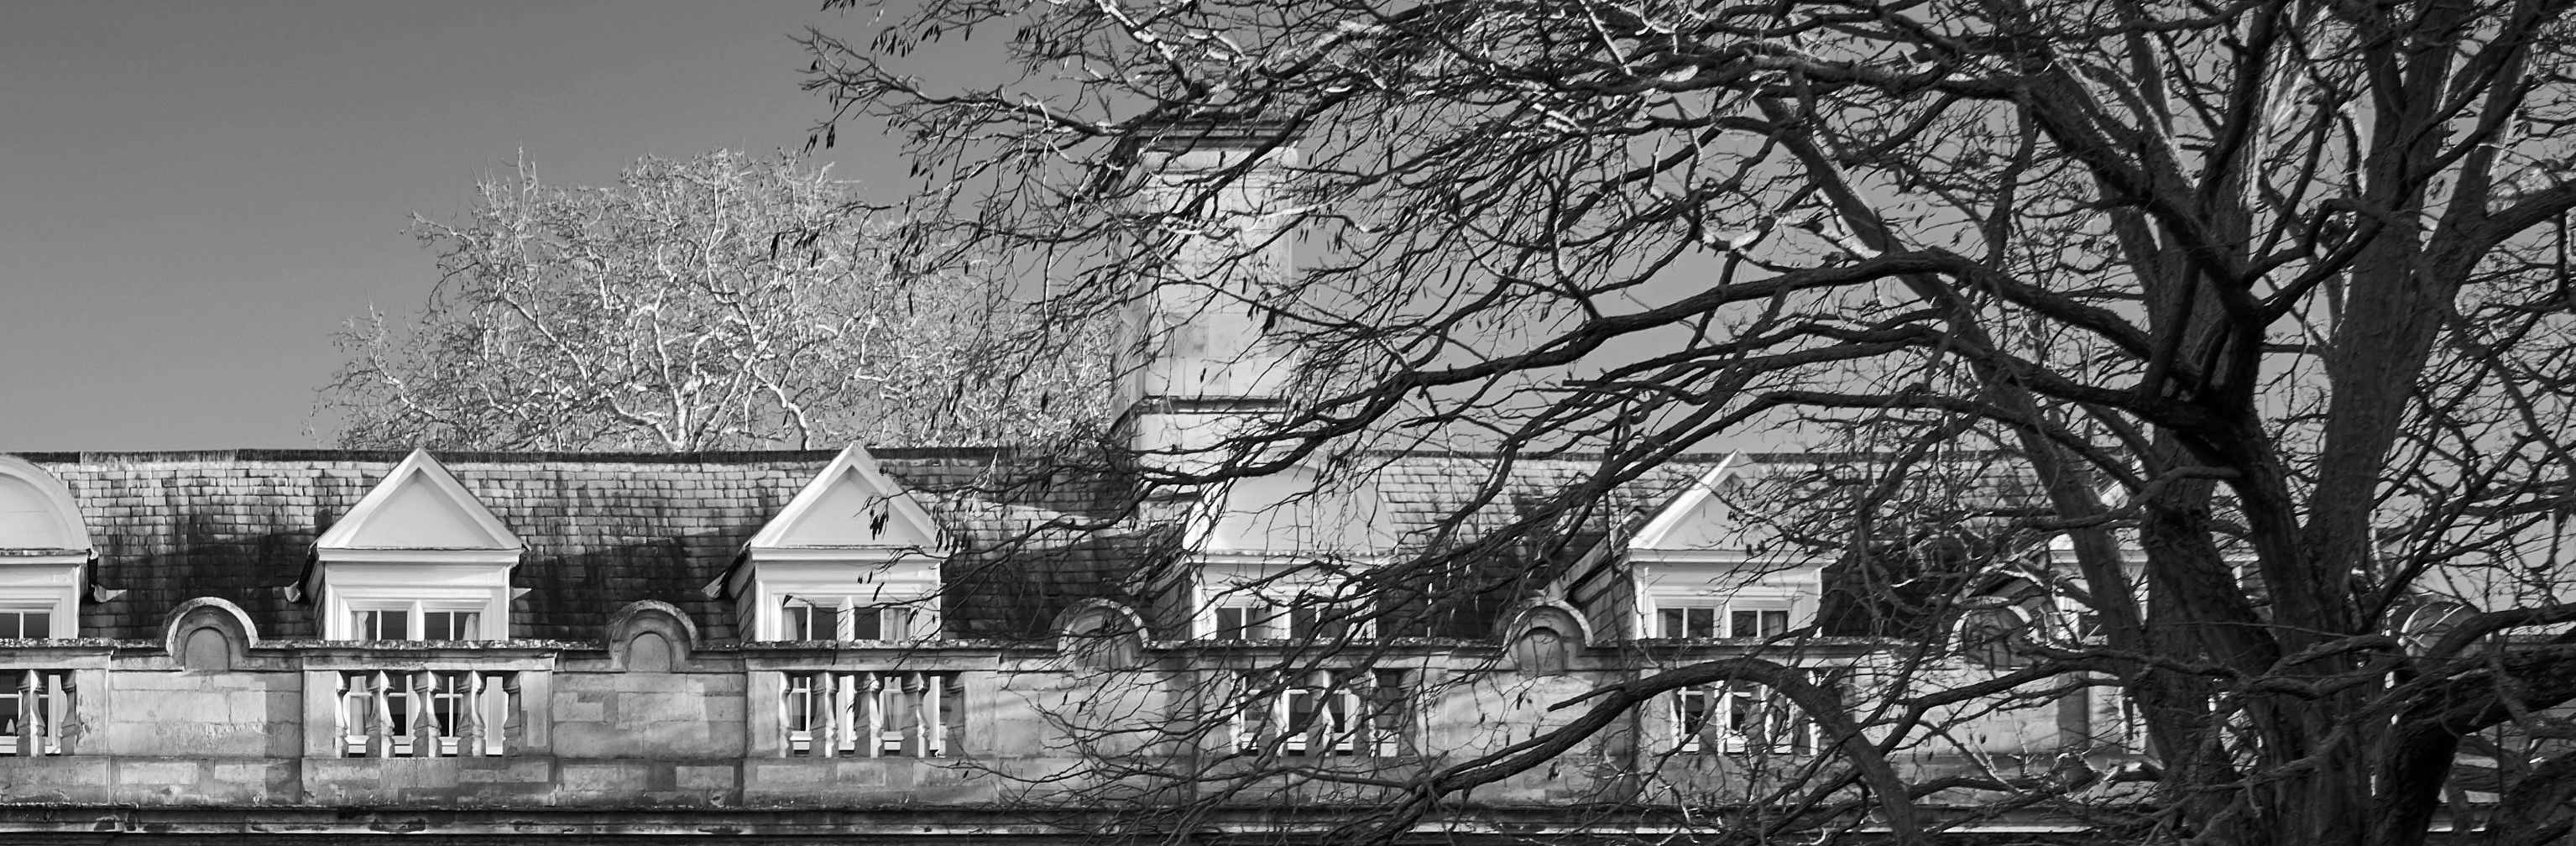 Fellows' Building and tree